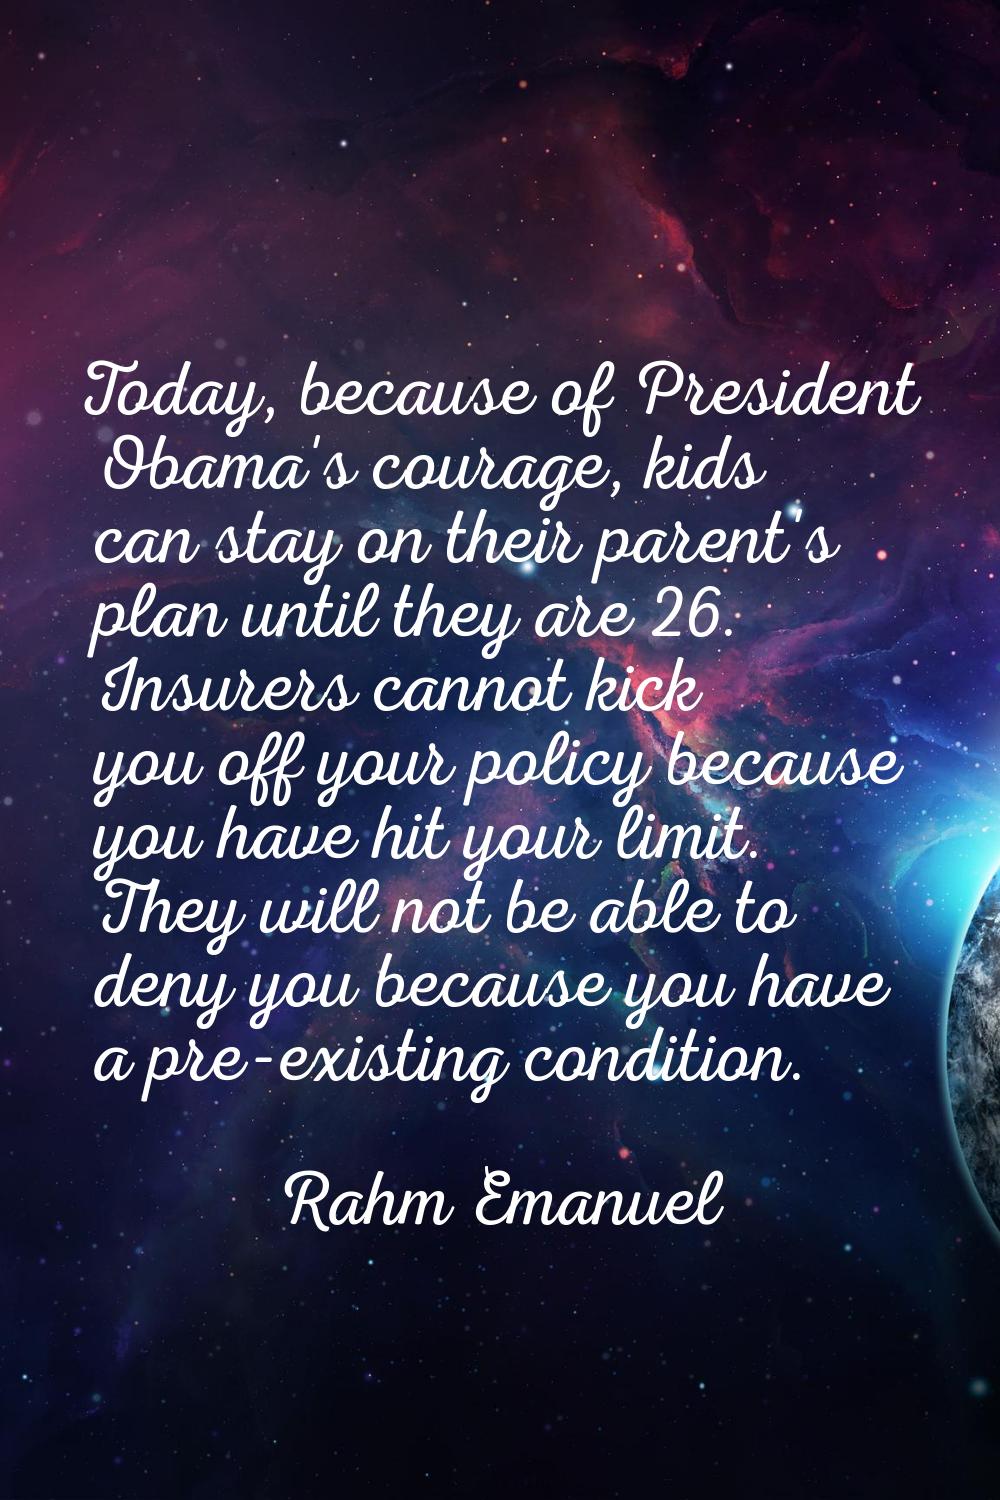 Today, because of President Obama's courage, kids can stay on their parent's plan until they are 26